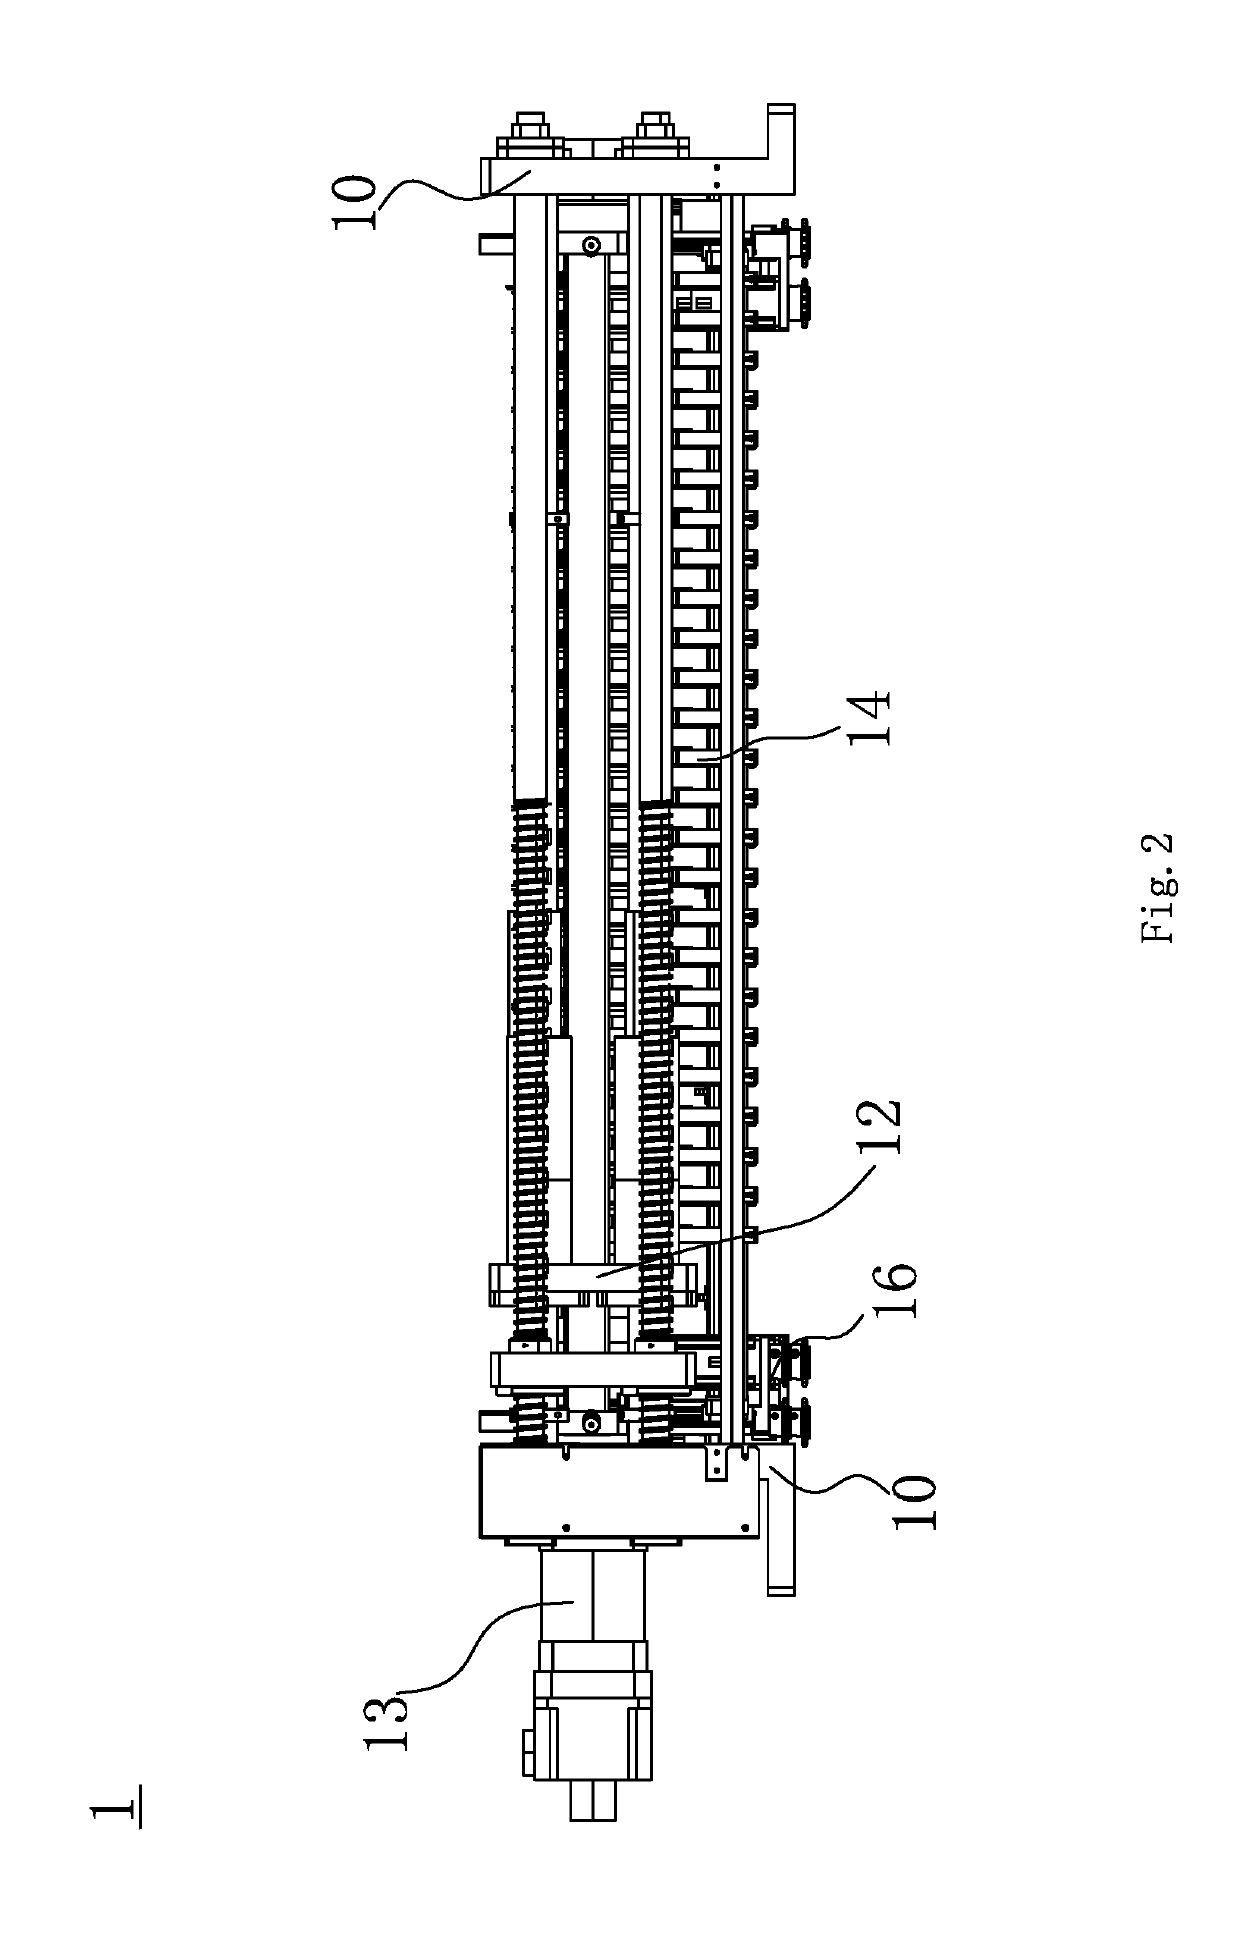 Lithium Battery Formation Fixture and Automation Battery Formation Equipment